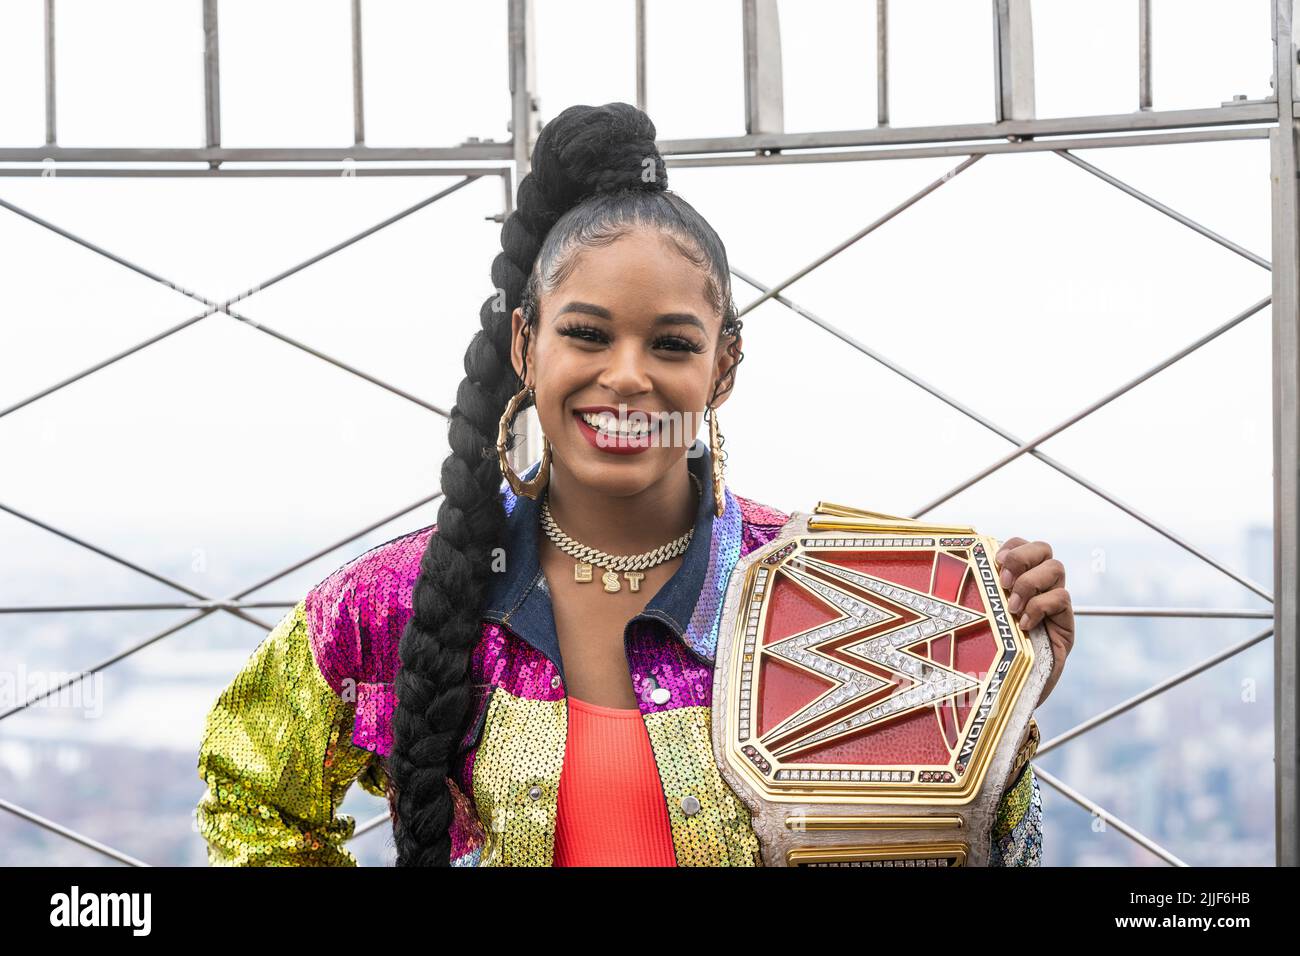 New York, NY - July 25, 2022: WWE Raw Women’s Champion Bianca Belair poses on observation deck during visit to Empire State Building Stock Photo